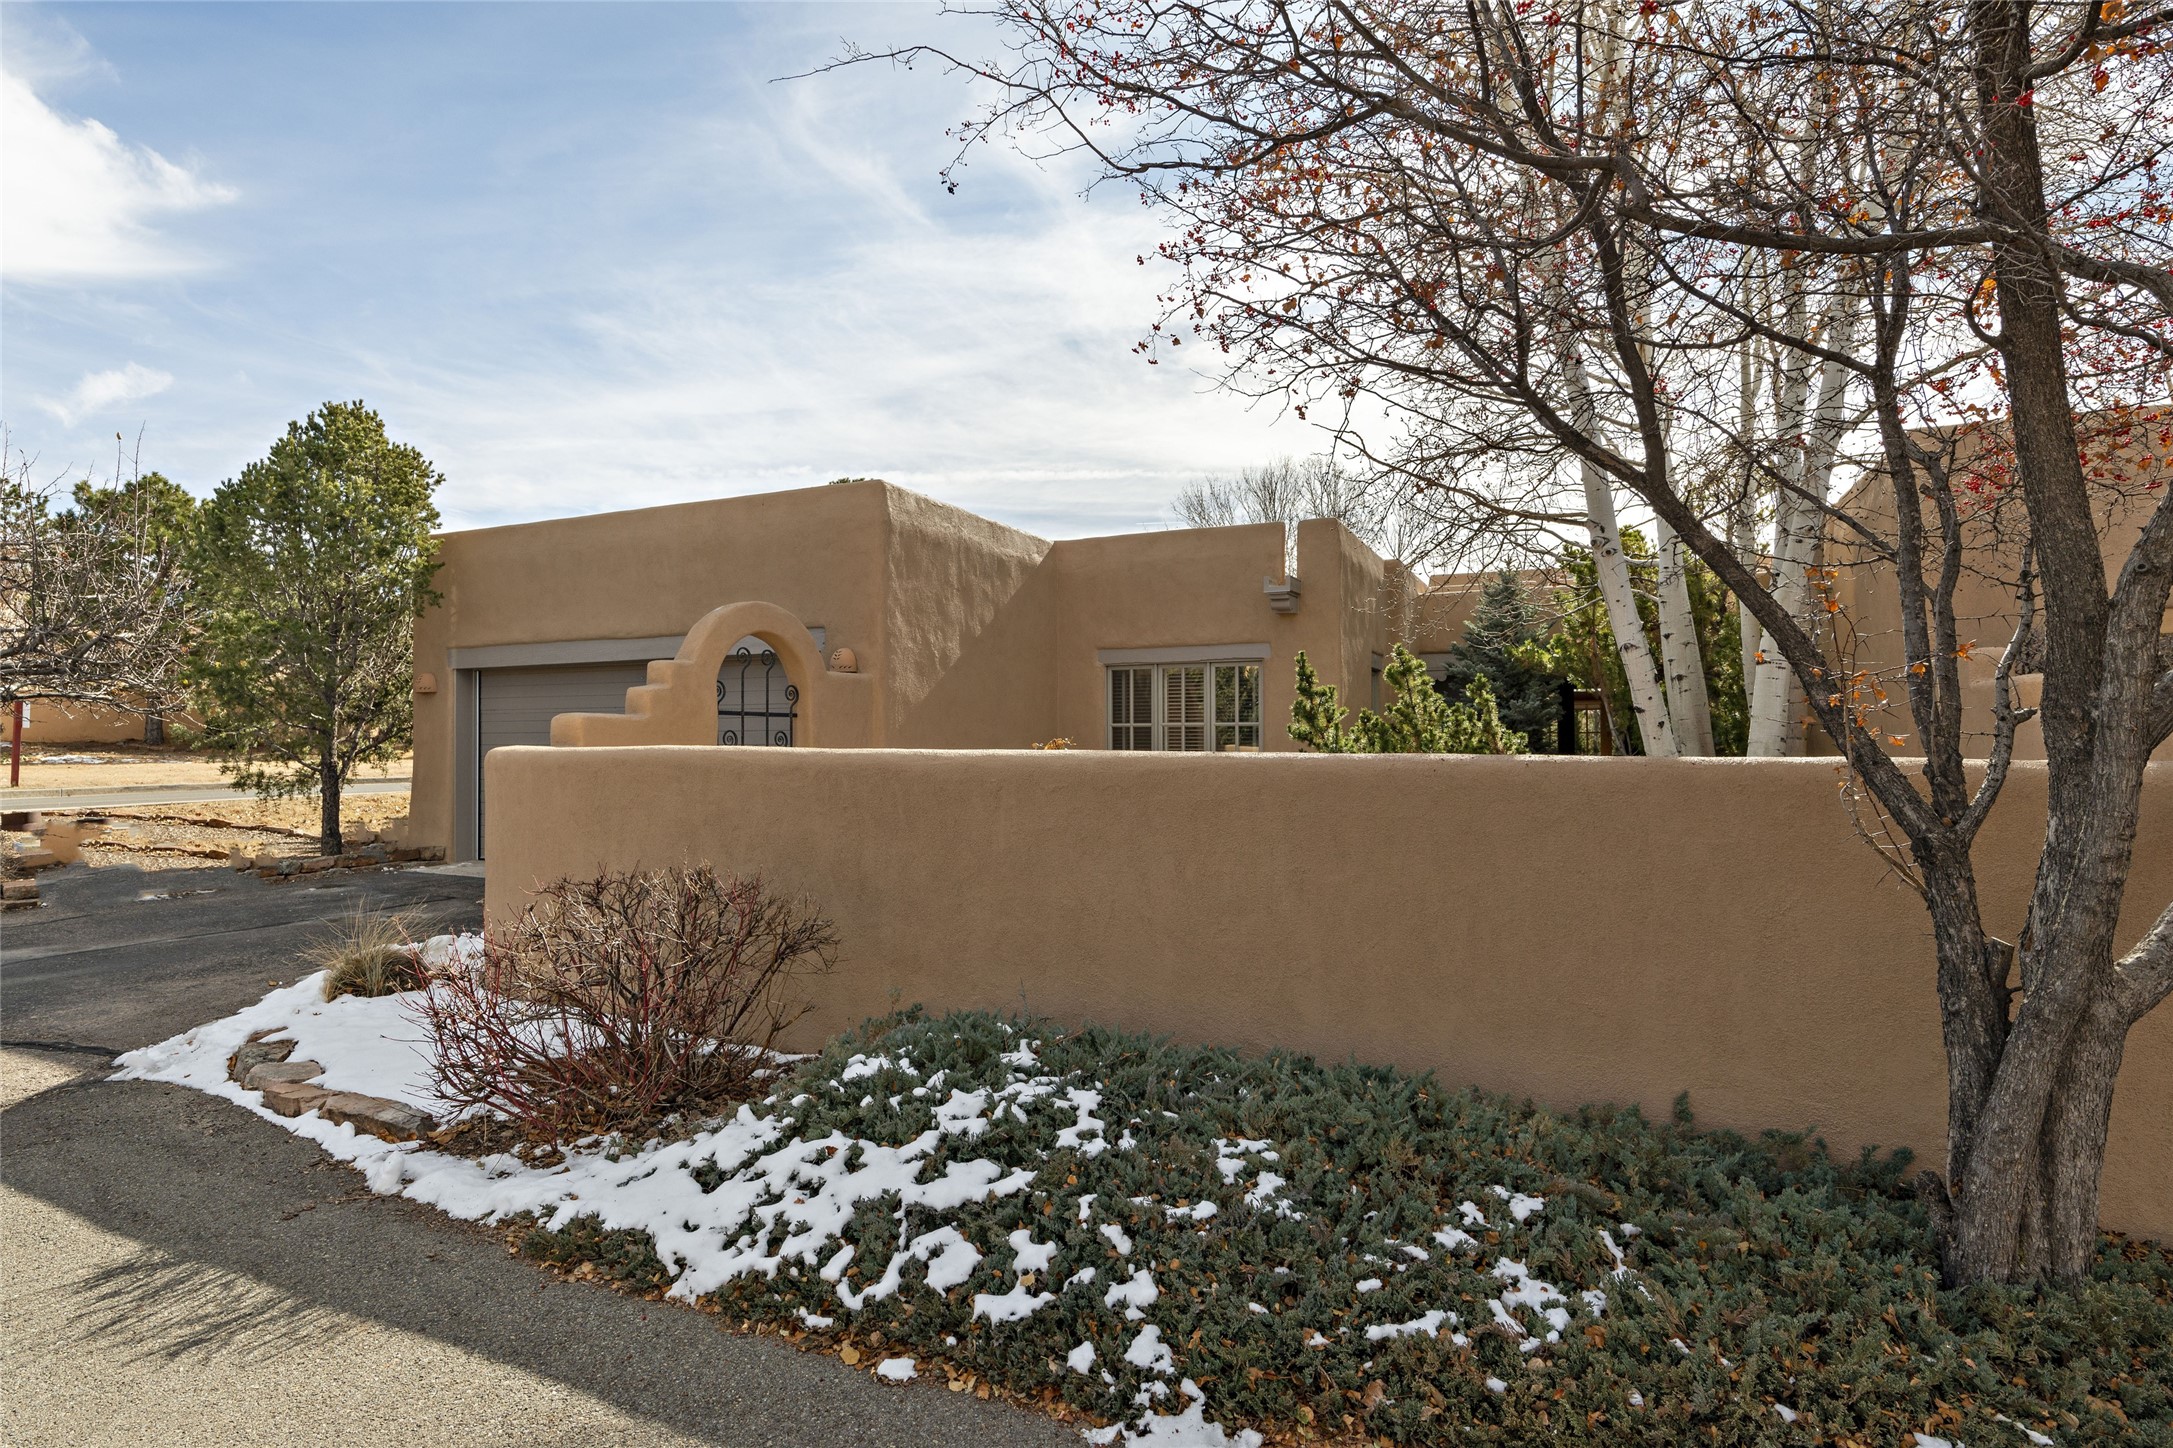 3101 Old Pecos Trail 683, Santa Fe, New Mexico 87505, 2 Bedrooms Bedrooms, ,2 BathroomsBathrooms,Residential,For Sale,3101 Old Pecos Trail 683,202233989